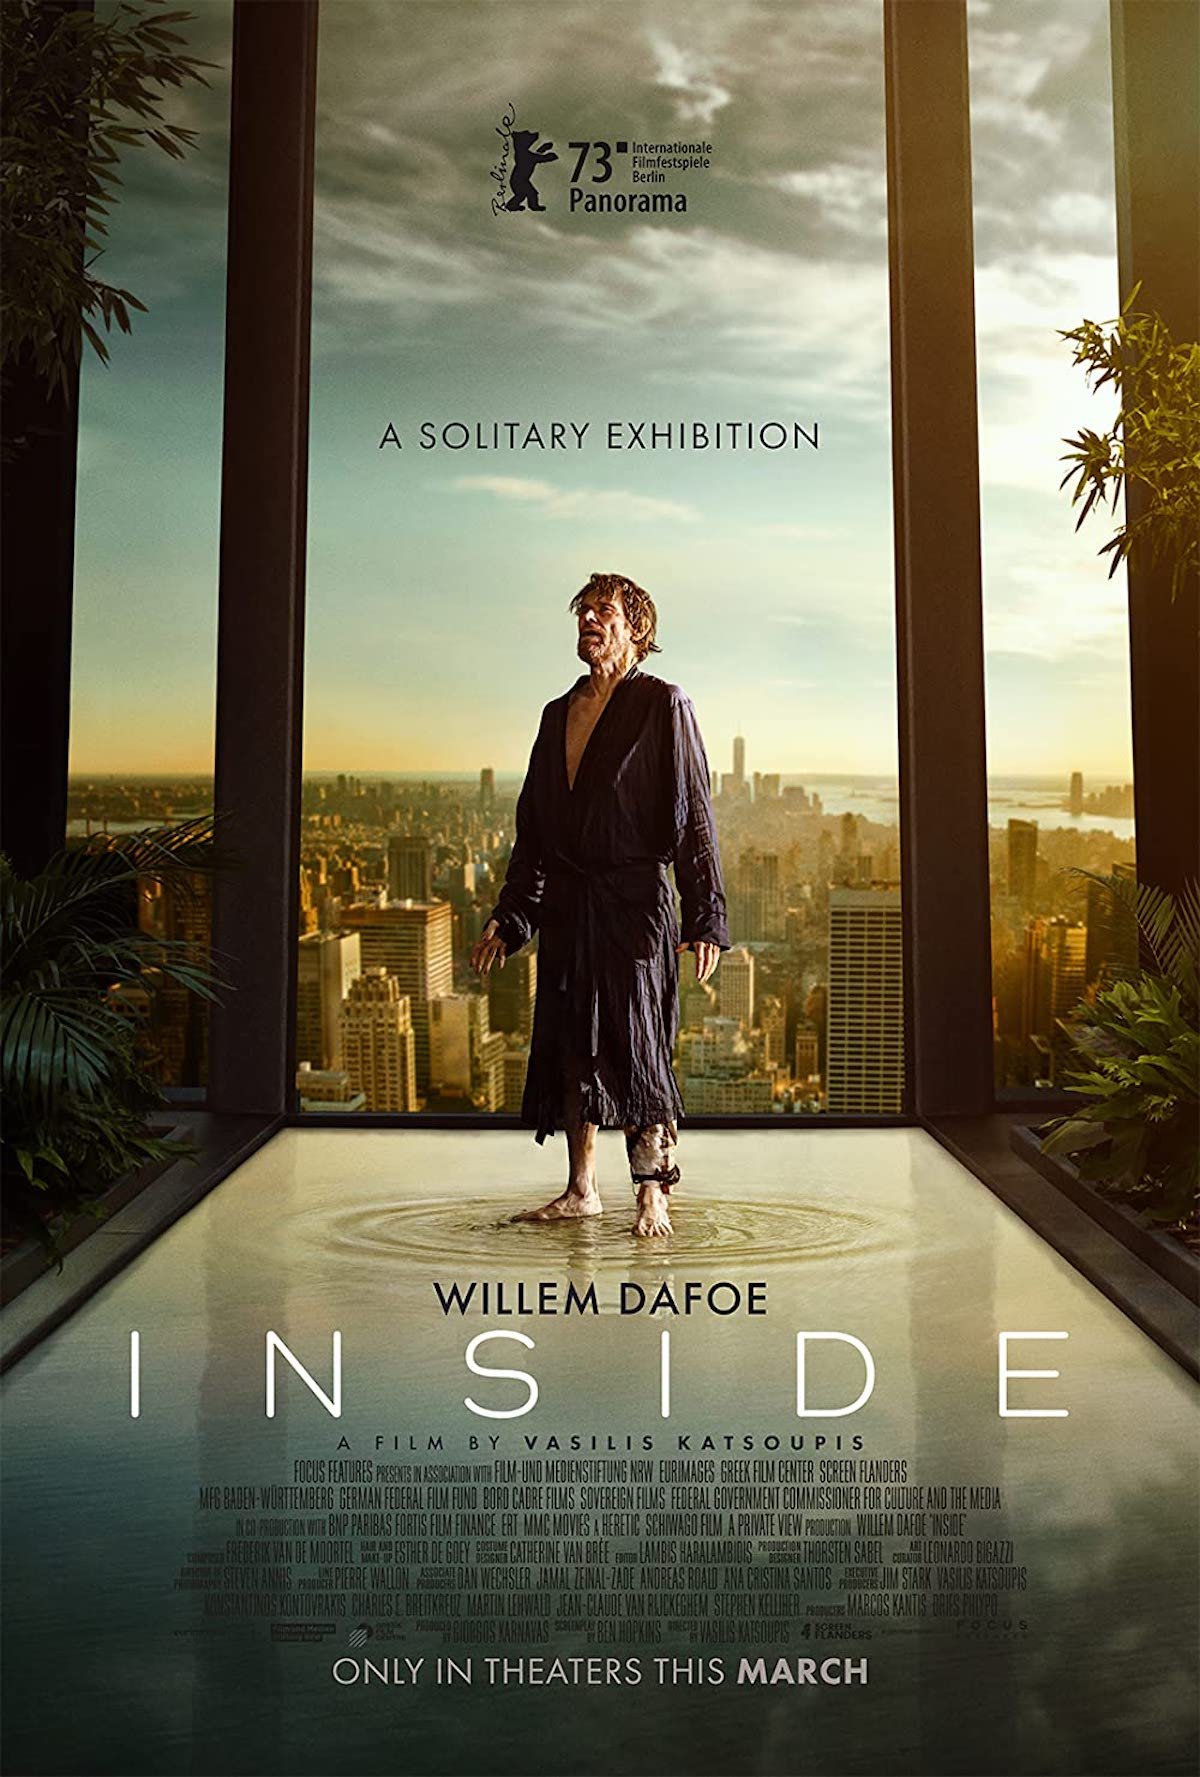 Willem Dafoe in a bathroom in a penthouse on the poster for Inside